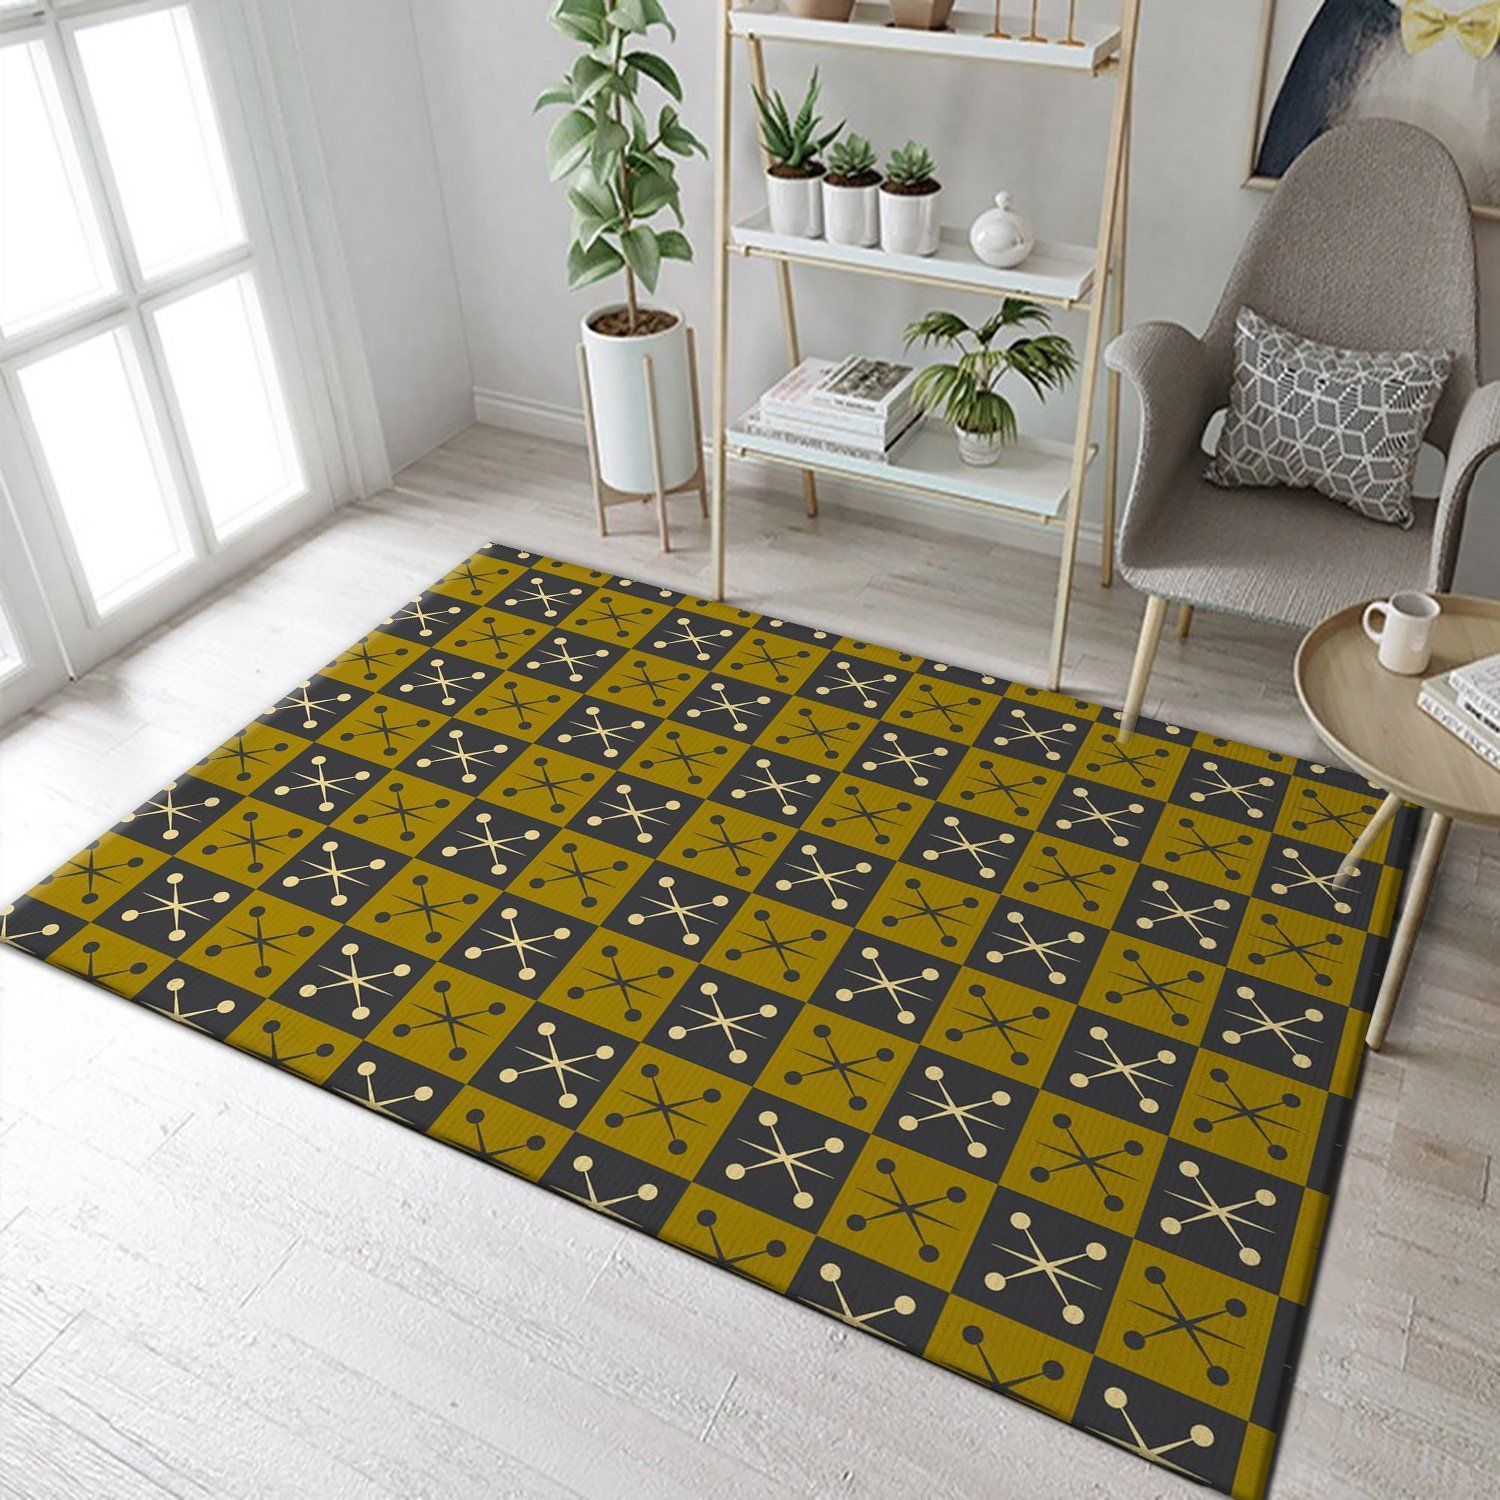 Midcentury Pattern 65 Area Rug For Christmas, Living Room Rug, US Gift Decor - Indoor Outdoor Rugs